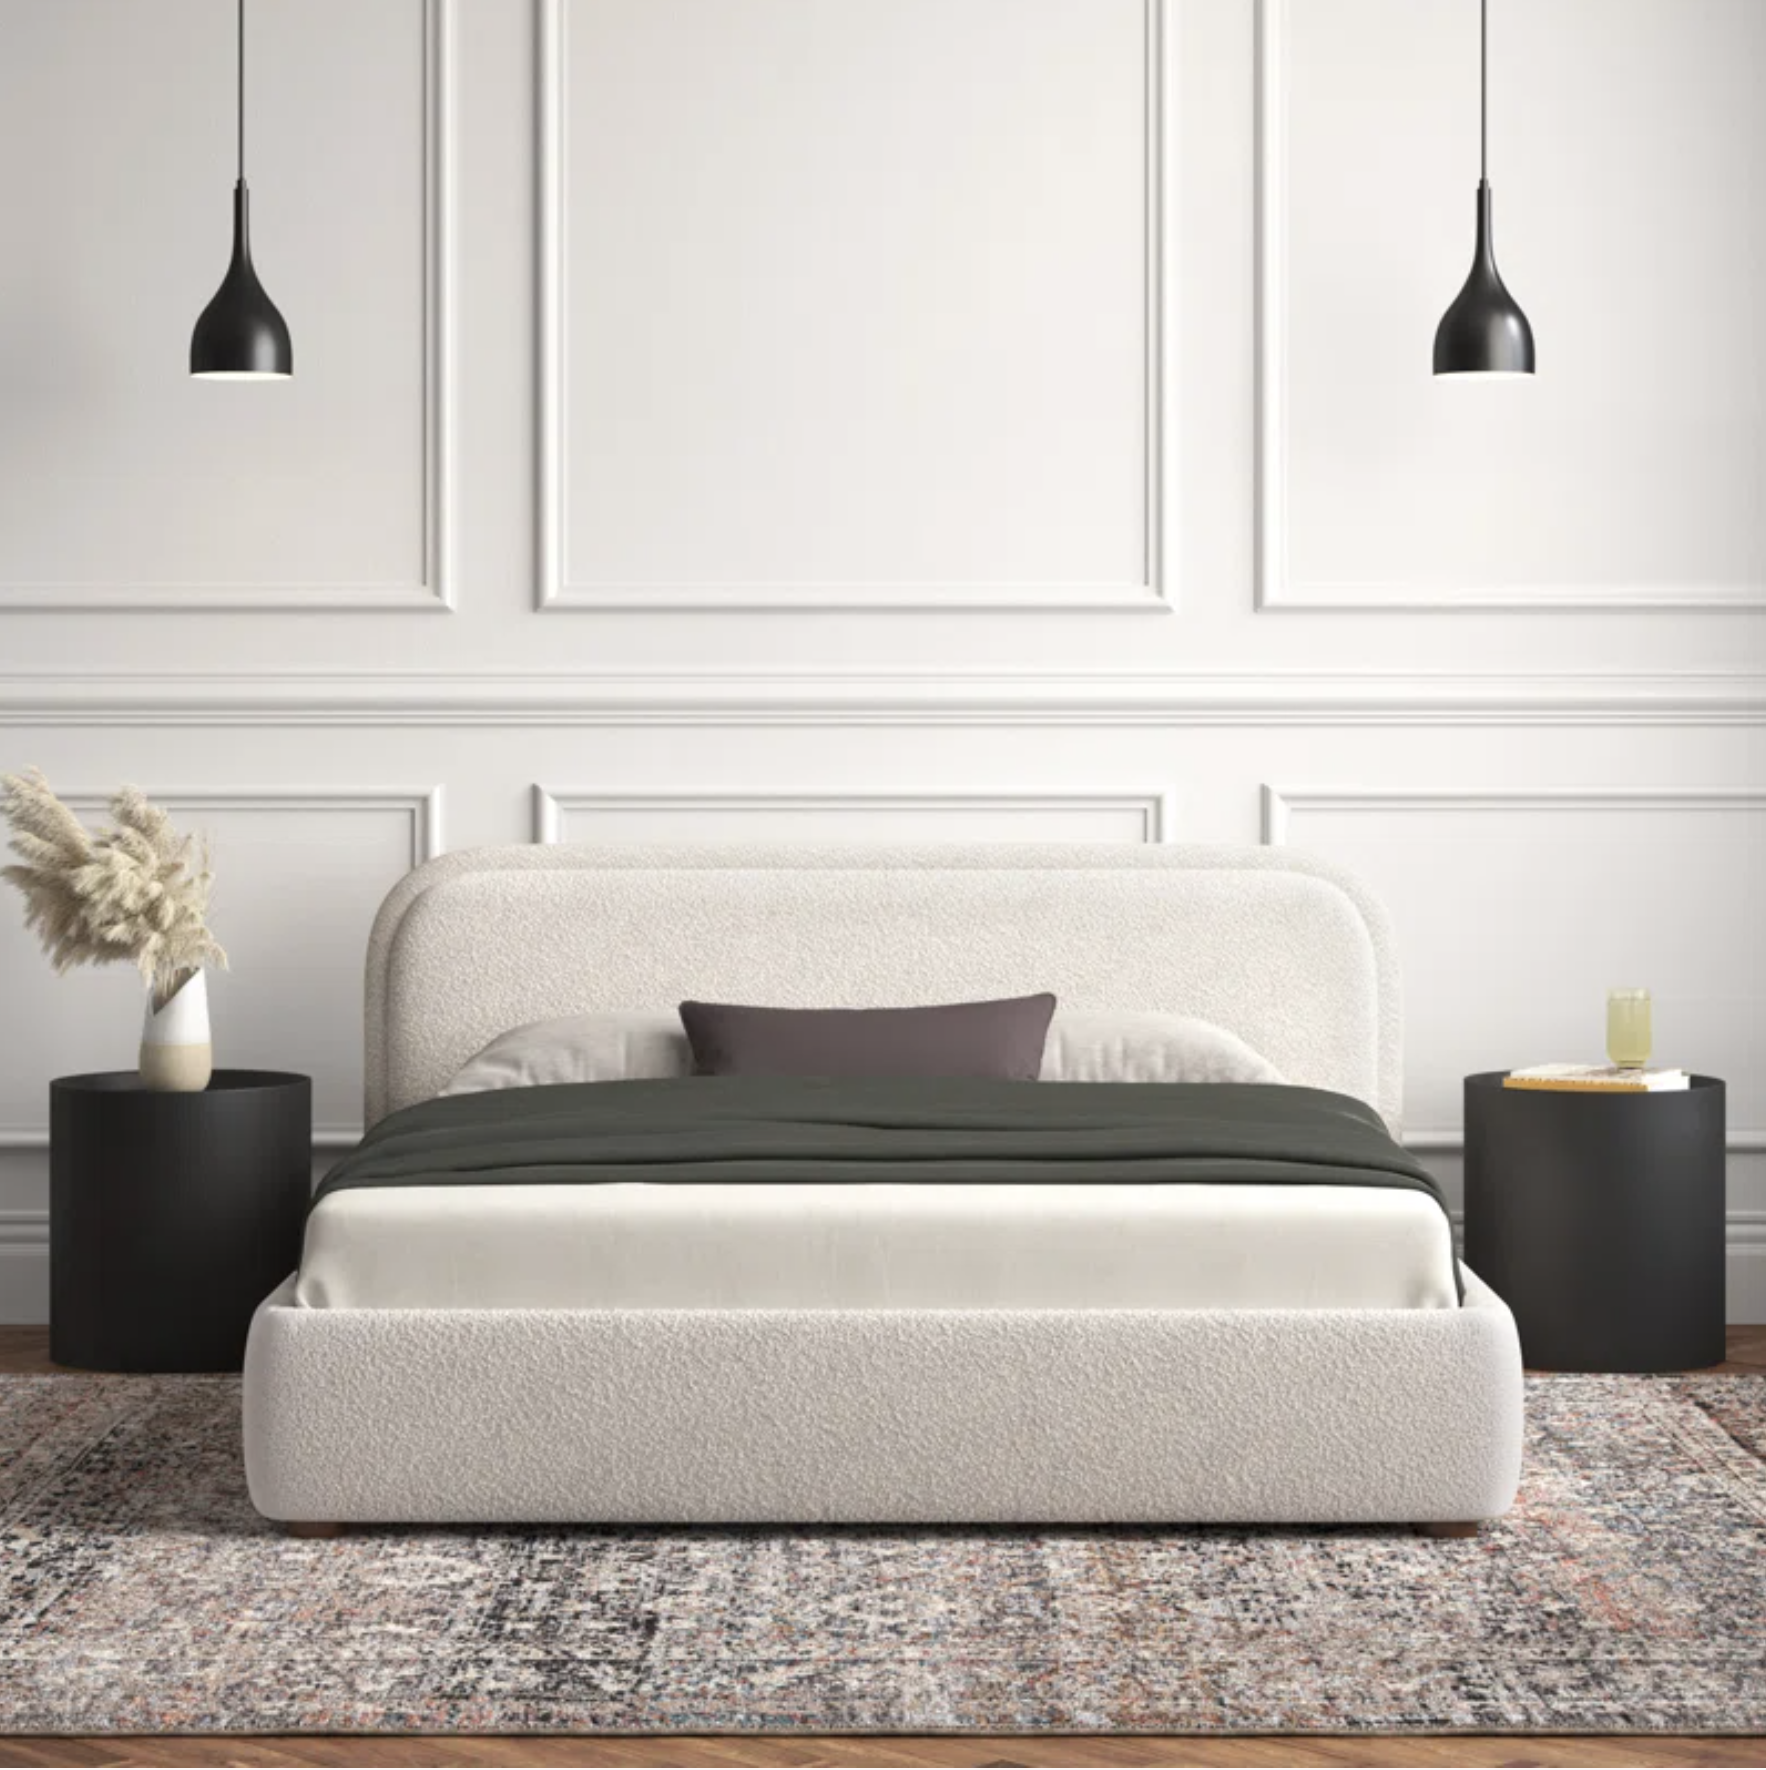 Your Precious Rest Needs One of These 10 Cloud Bed Dupes